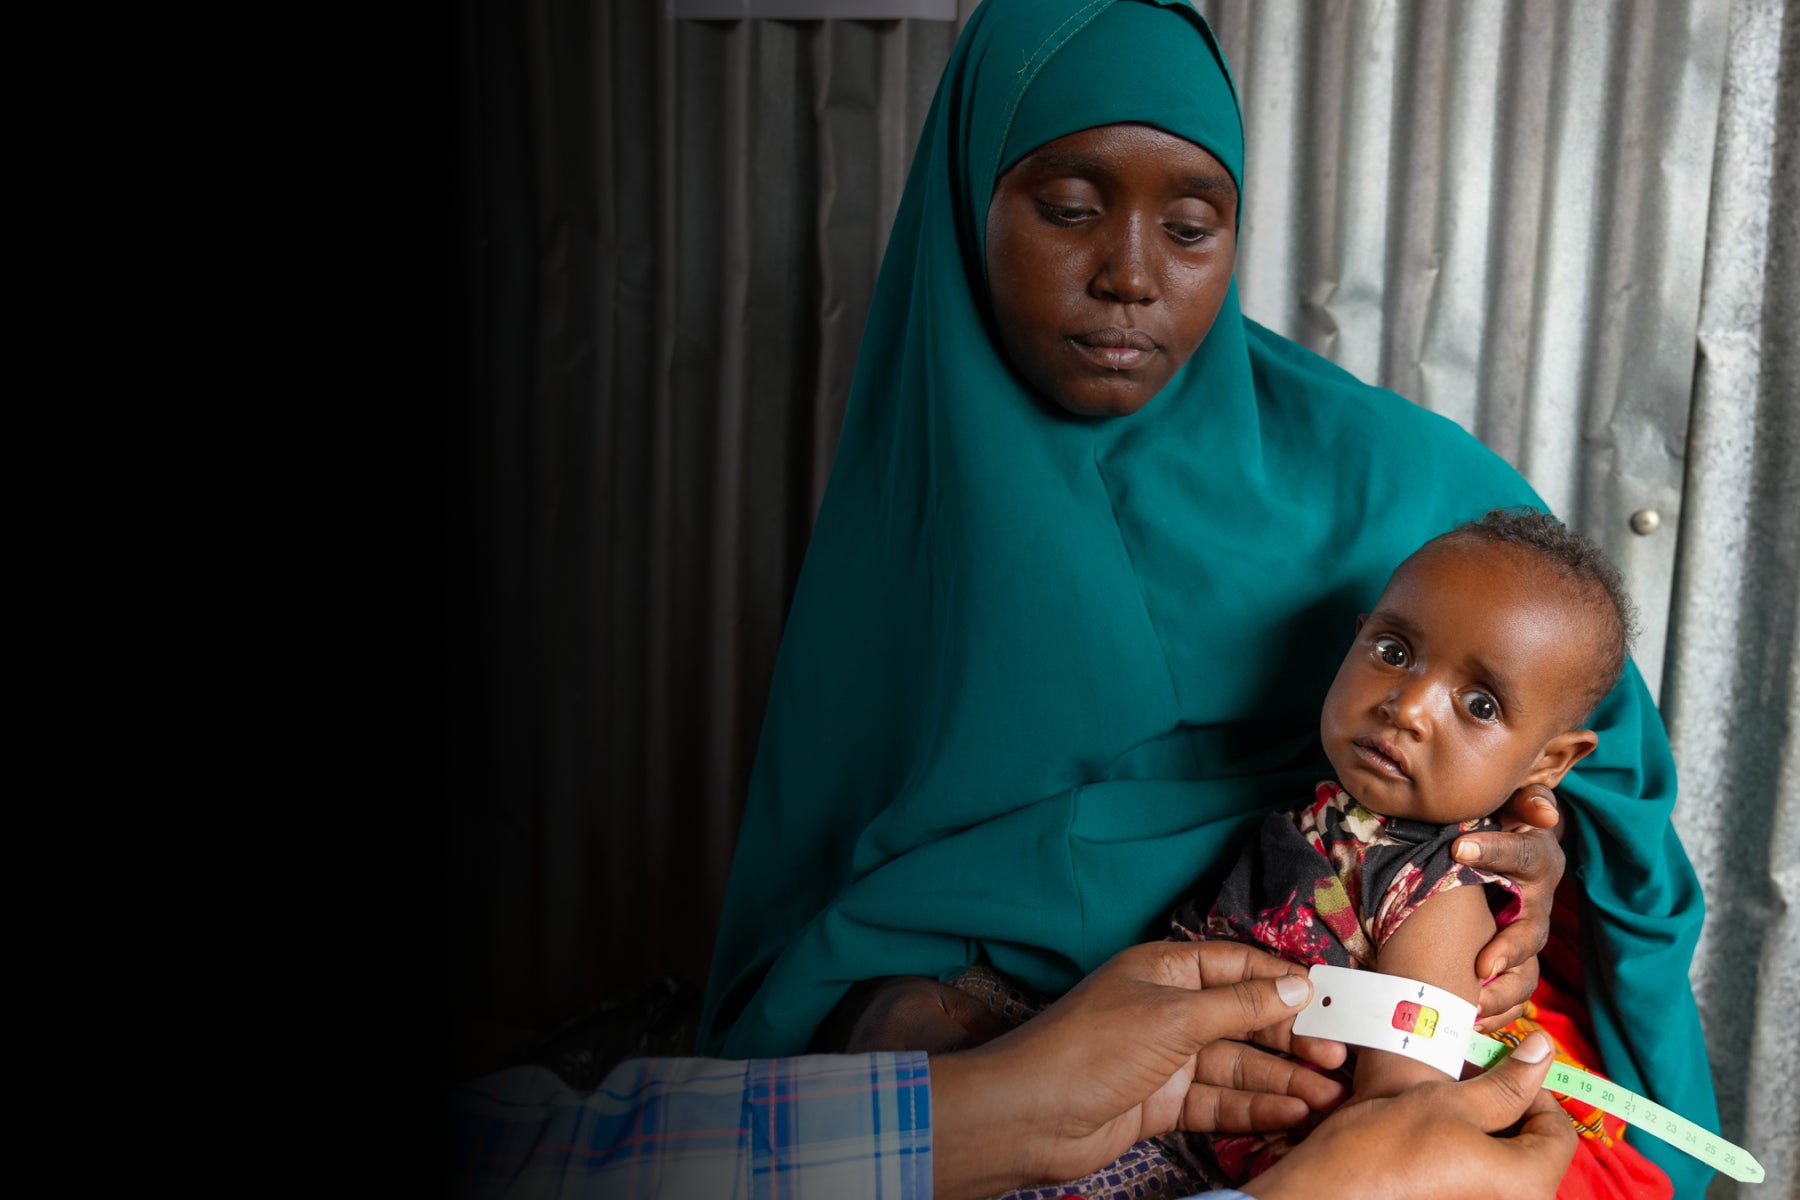 Mother holding her child in Somalia who is suffering from malnutrition